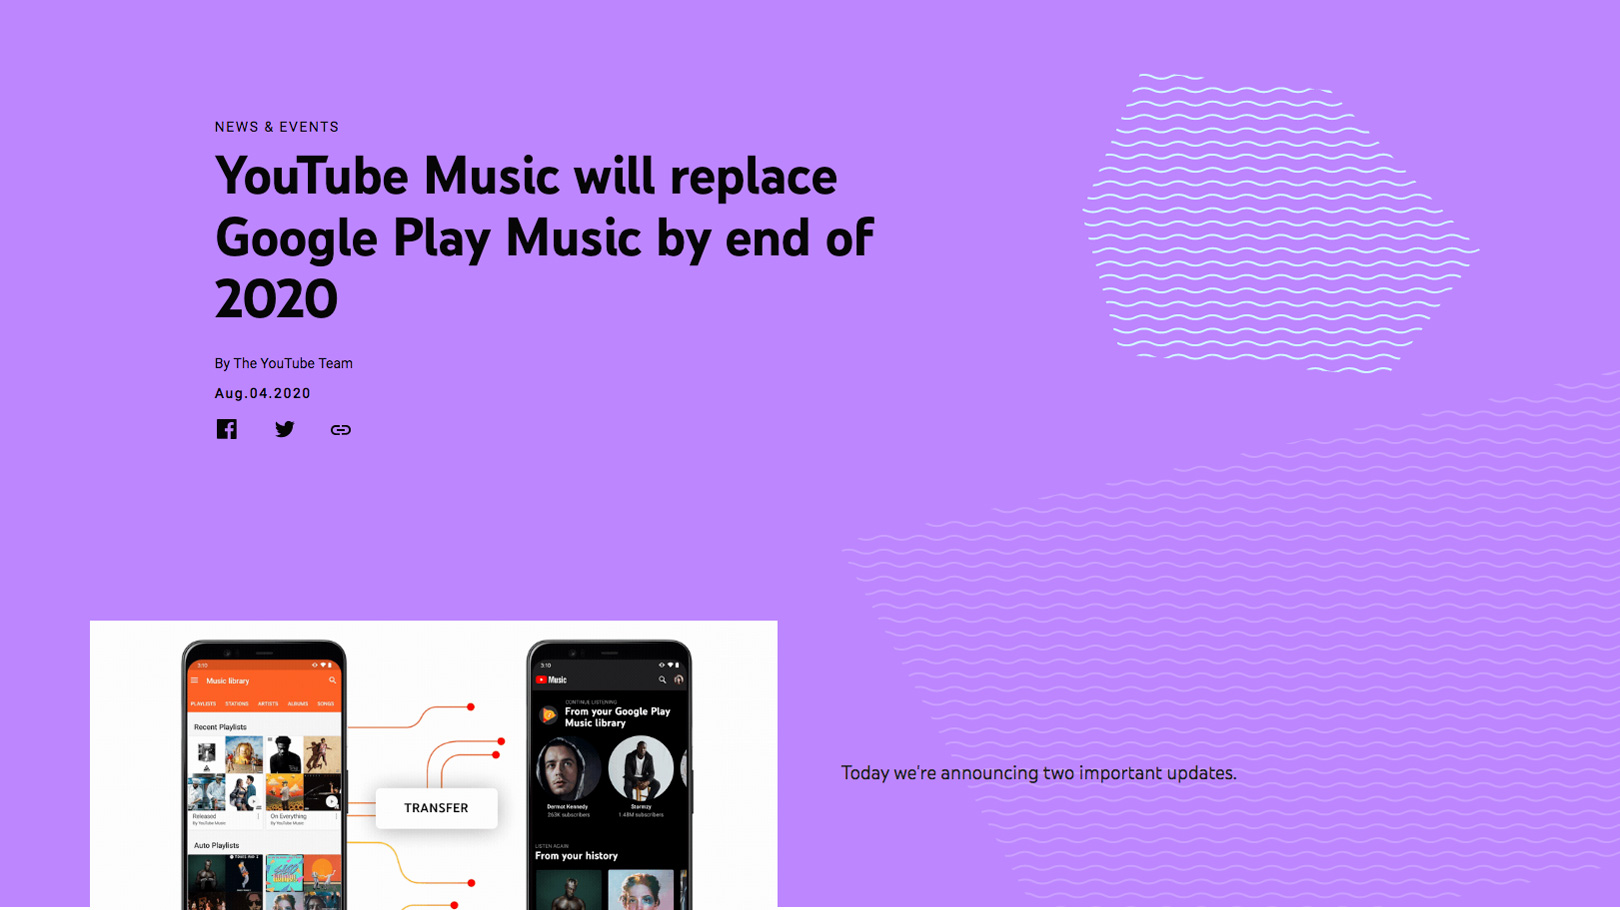 (Screenshot von https://blog.youtube/news-and-events/youtube-music-will-replace-google-play-music-end-2020/)